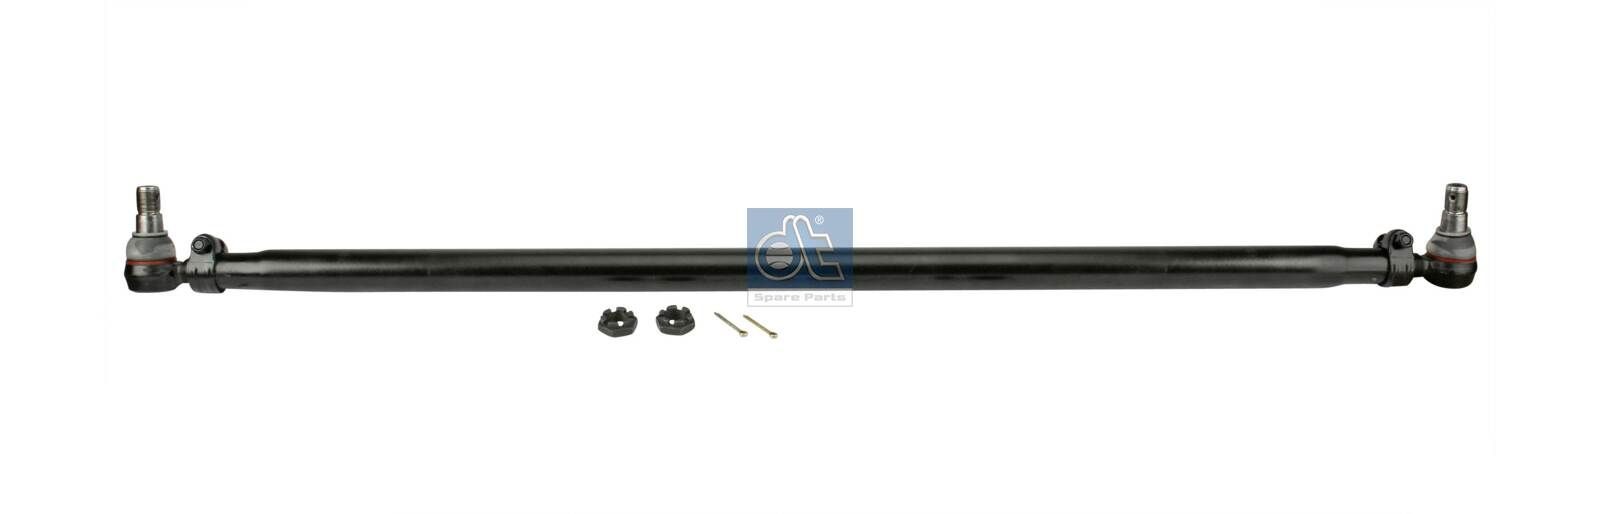 DT Spare Parts 4.62874 Rod Assembly 949 330 18 03